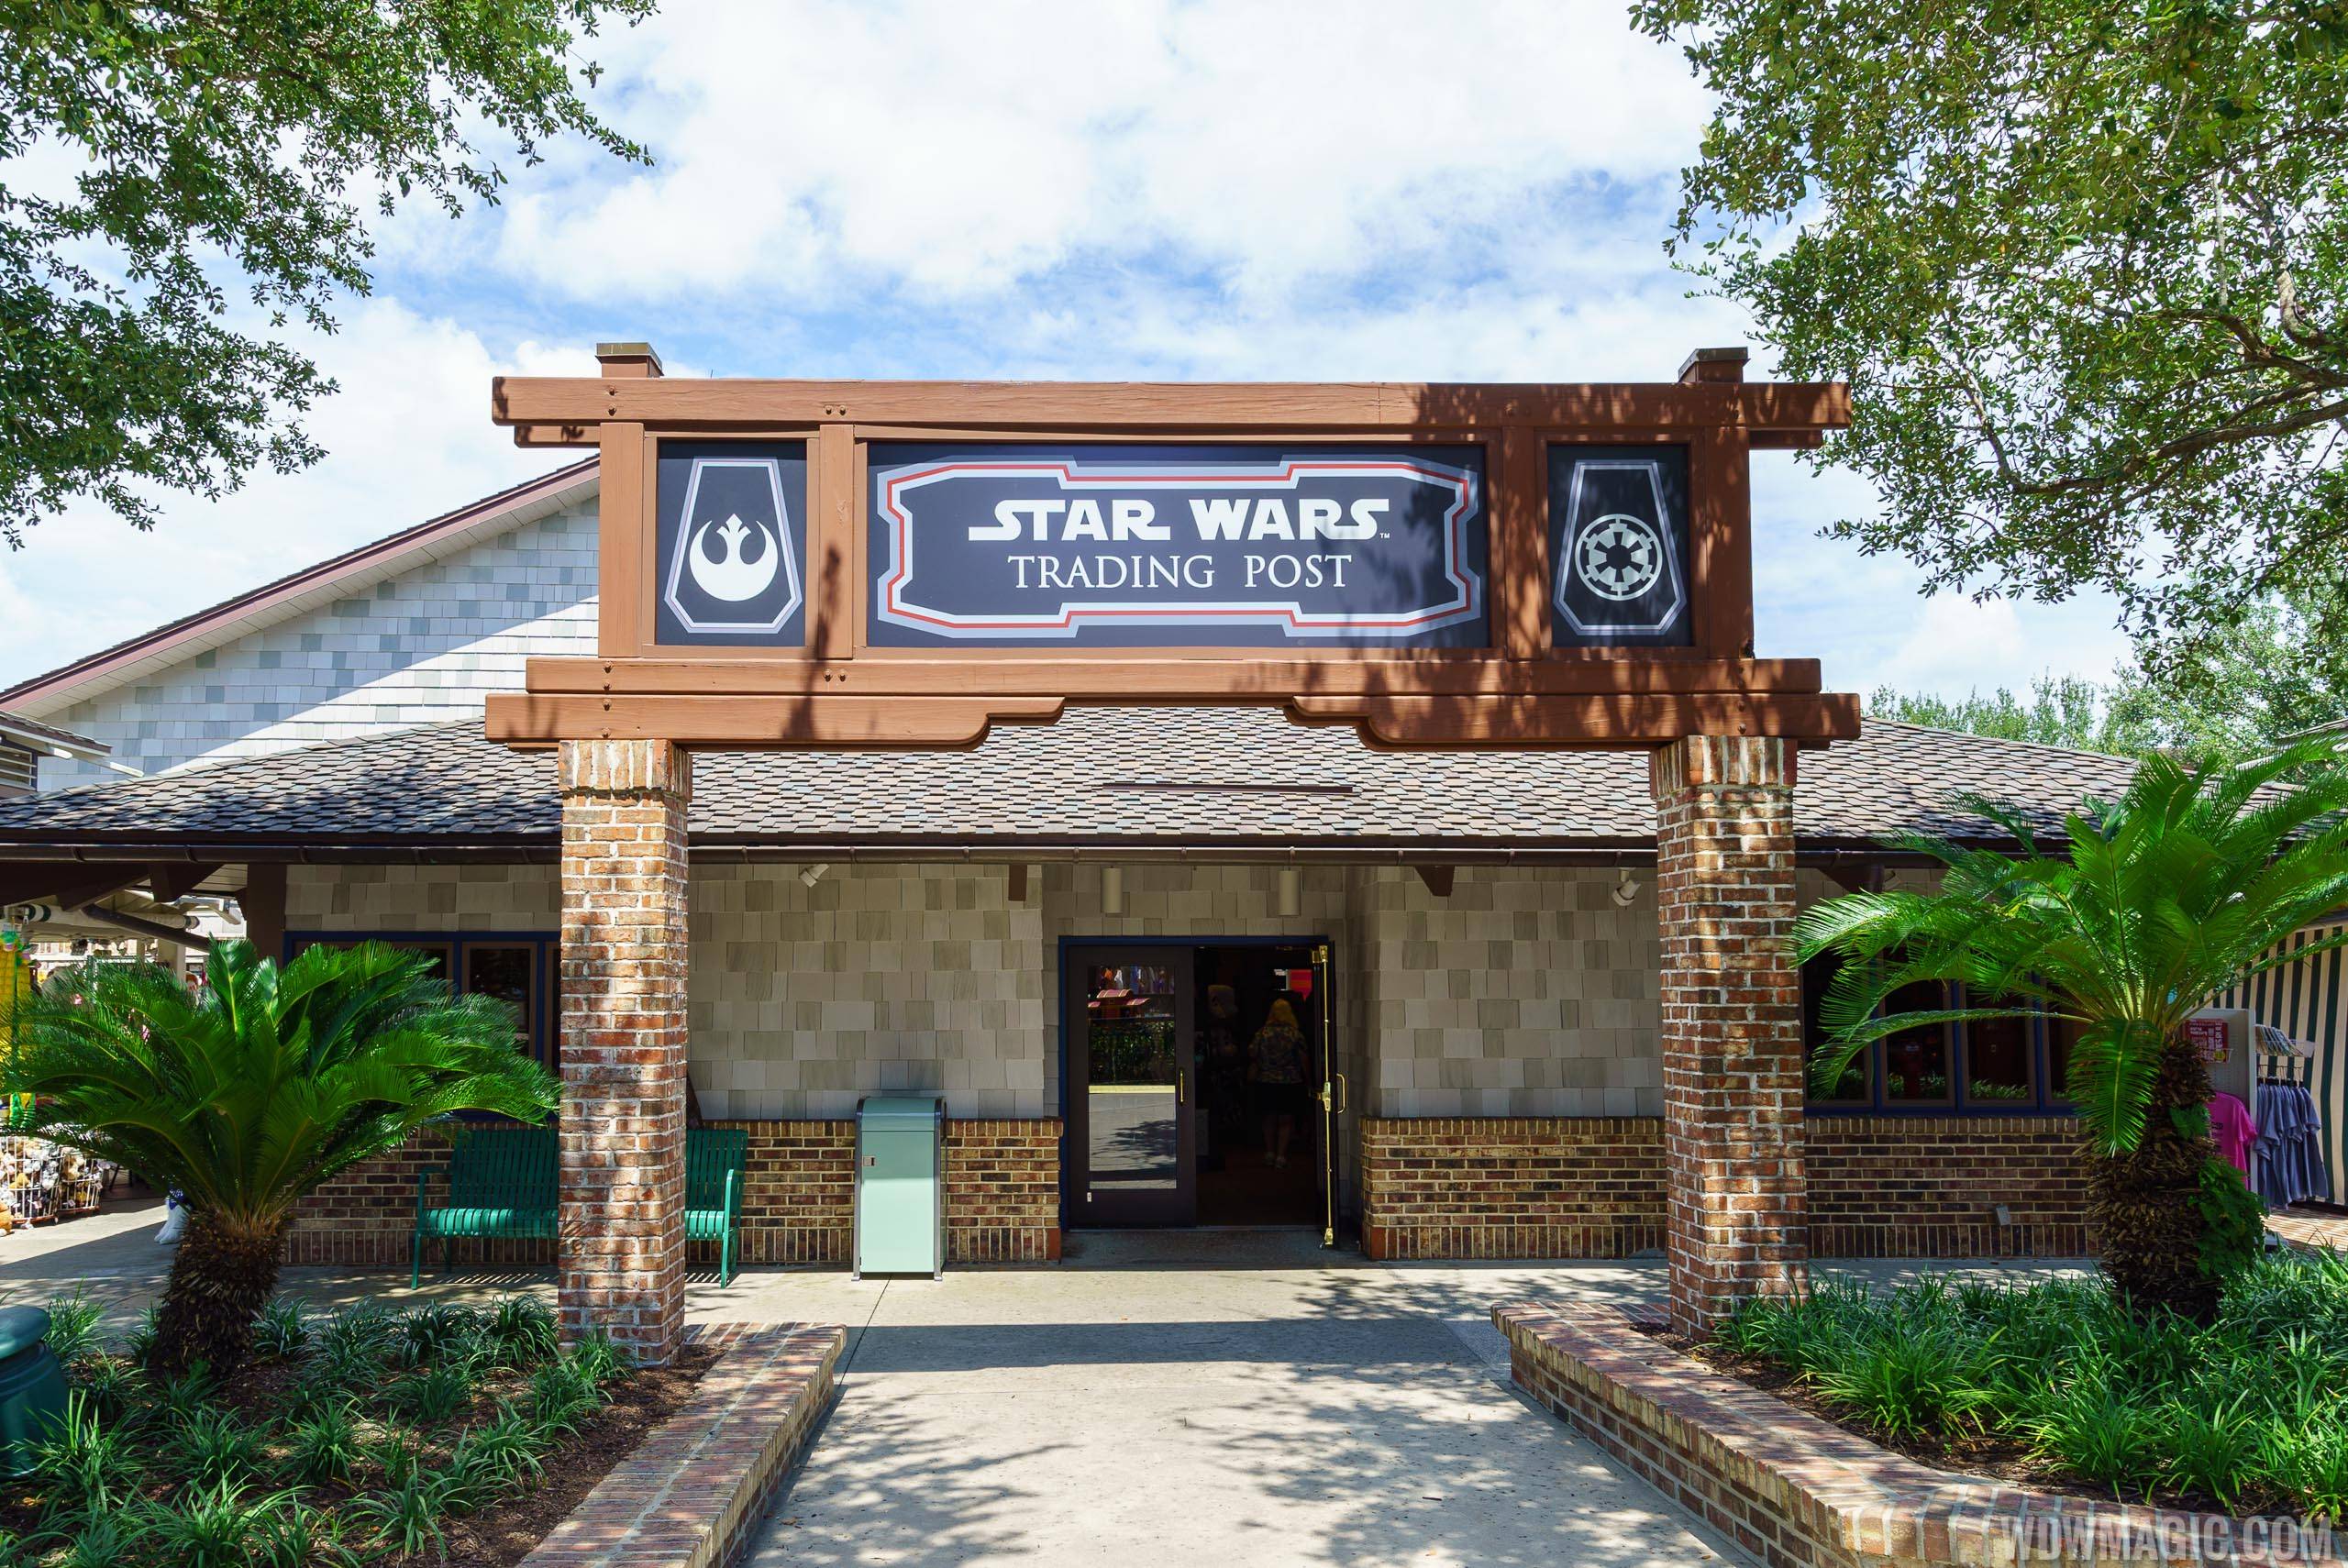 Star Wars Trading Post overview